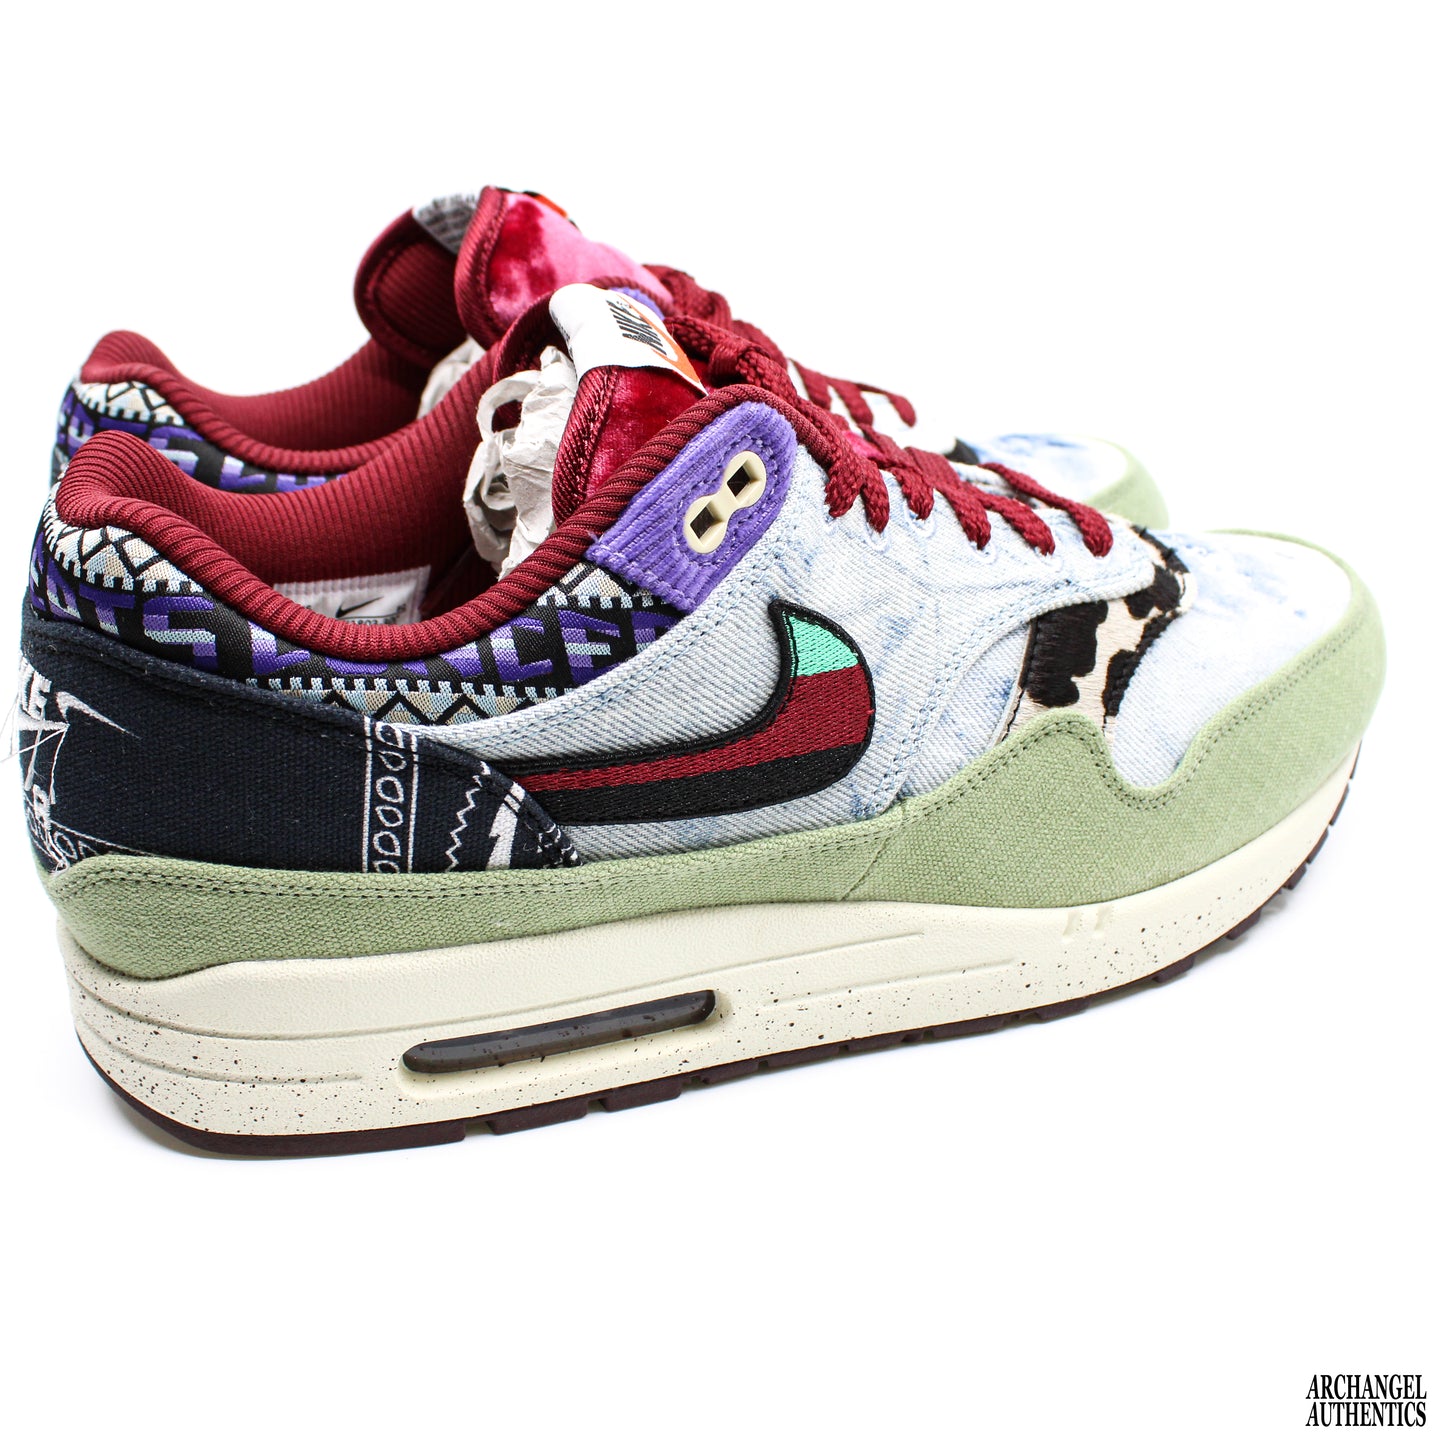 Nike Air Max 1 SP Concepts Mellow (Used)